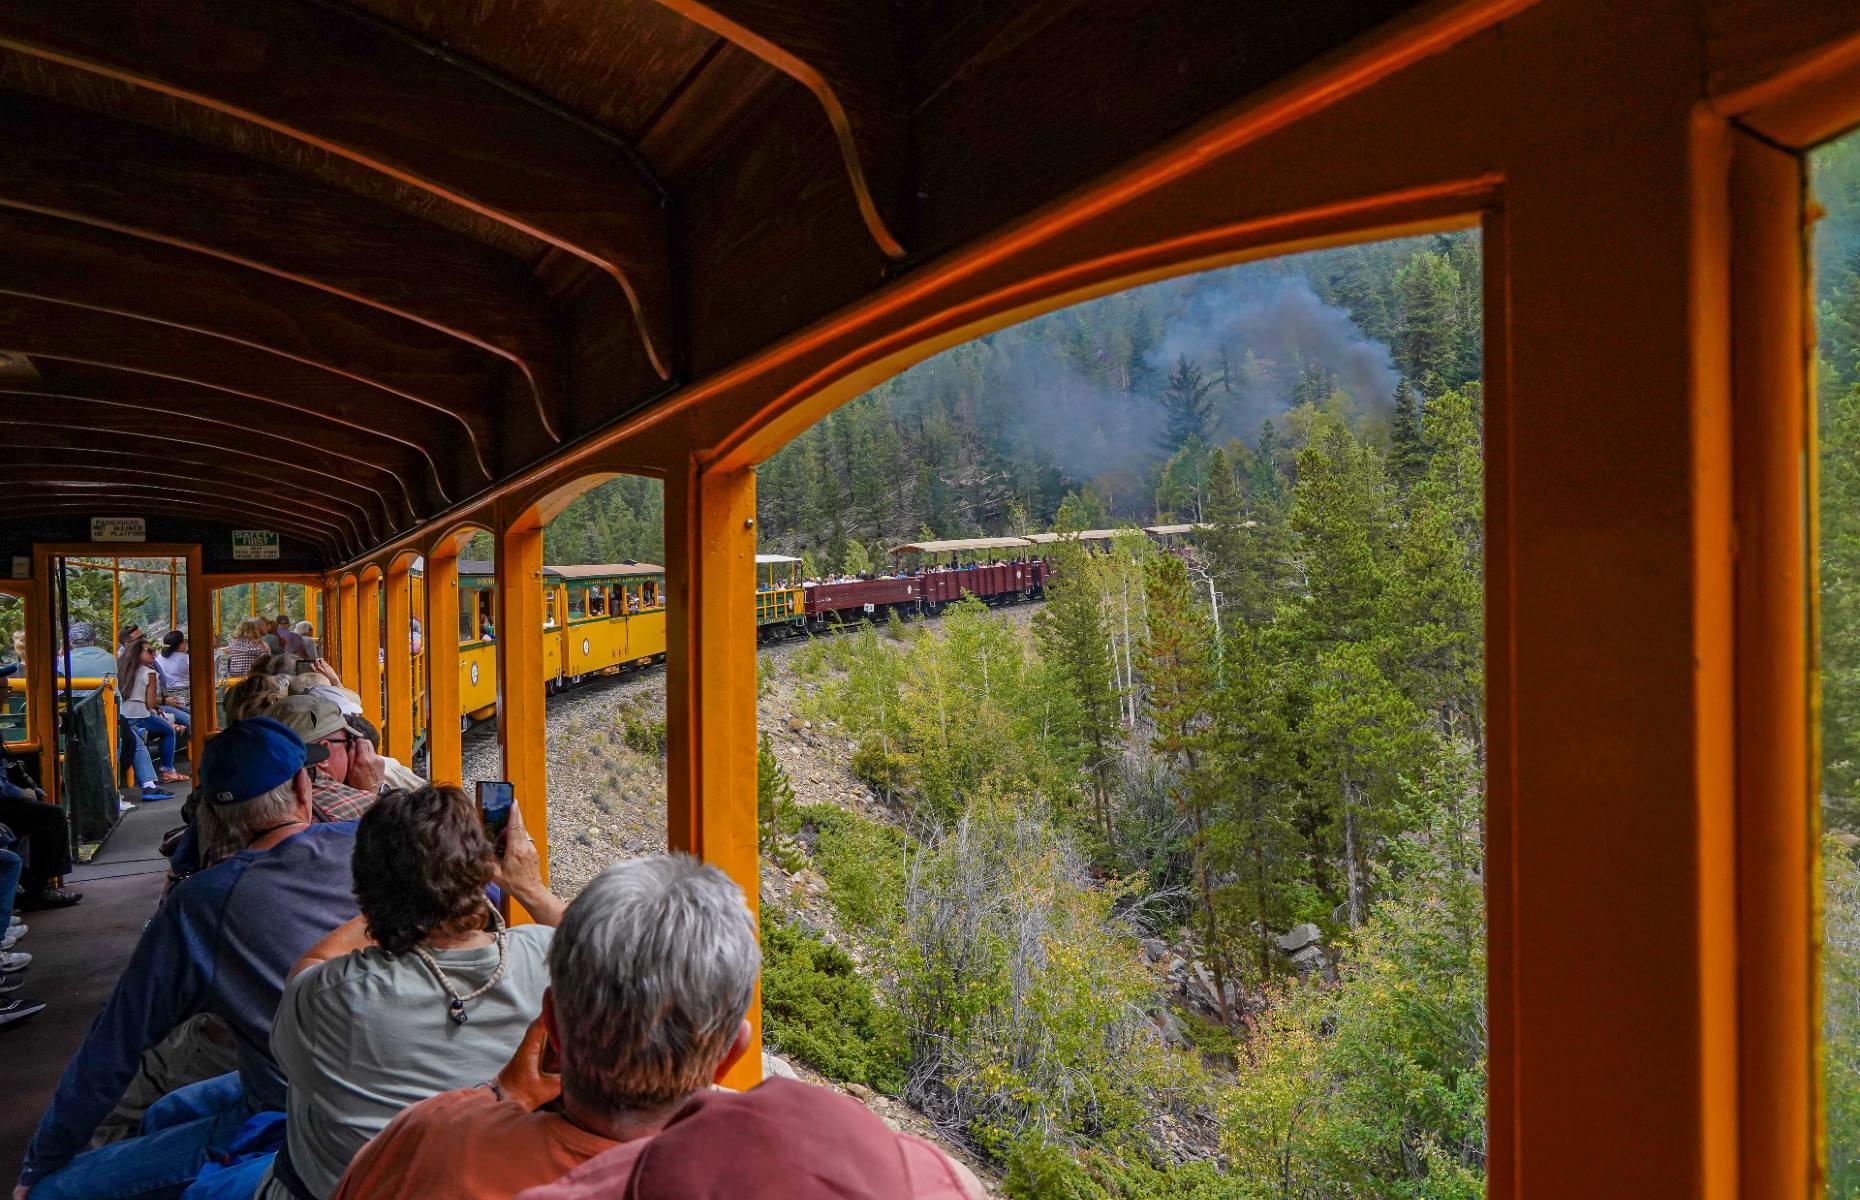 Today, Georgetown Loop Railroad’s legendary status endures. Between May and October, there are at least three daily departures from Devil’s Gate Depot, as well as select weekend departures from Silver Plume, costing $30.95 for adults and $24.95 for kids. You can also book a walking tour of the nearby Lebanon Silver Mine, learning about Georgetown’s long standing connection with the precious metal (it was formerly known as 'The Silver Queen of the Rockies').